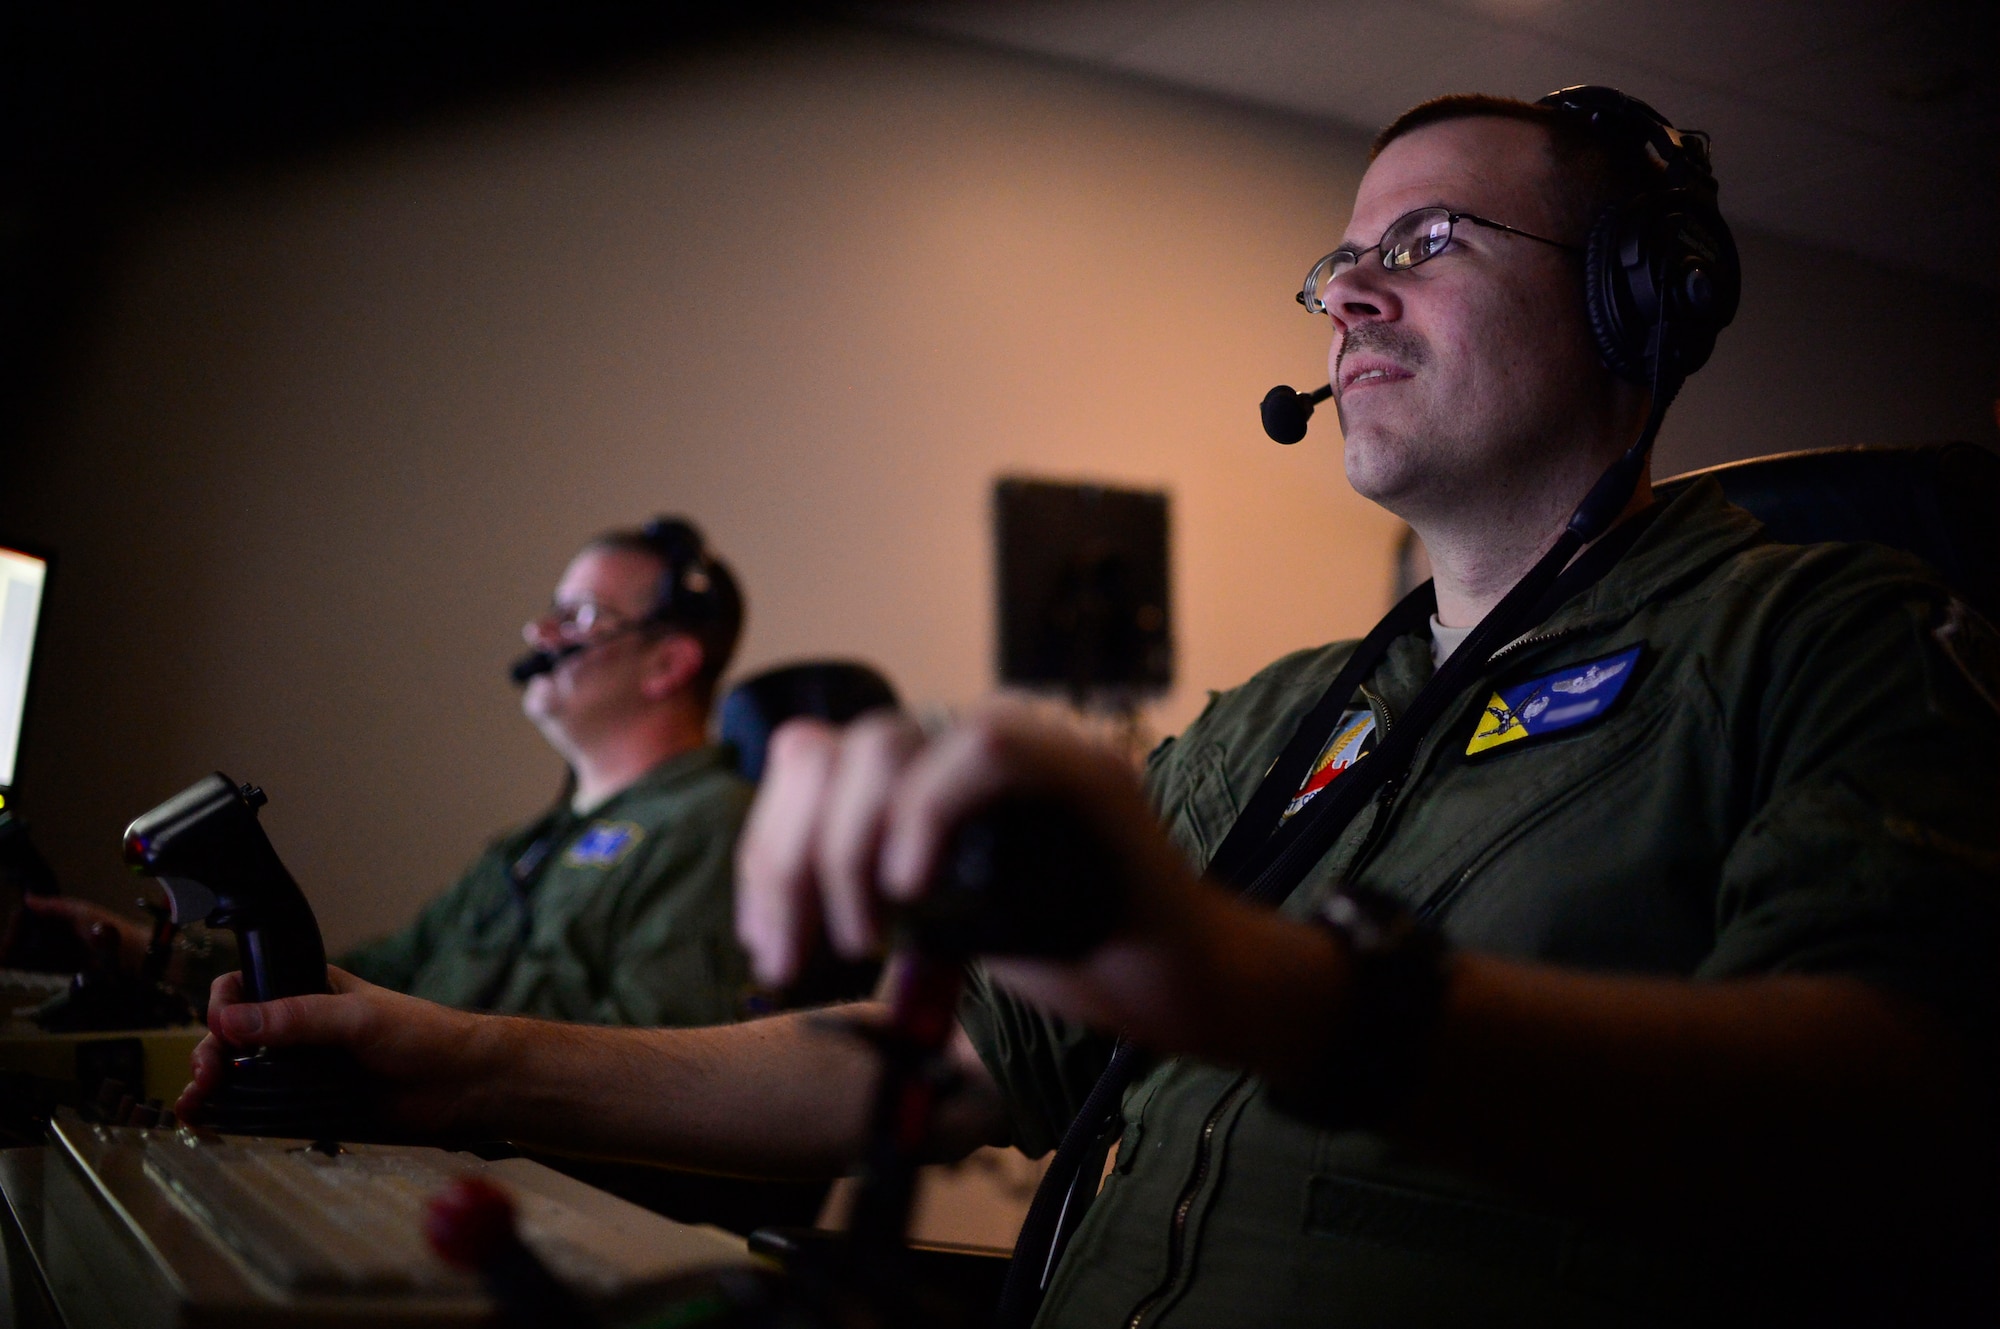 Lt. Col. Nicholas, 15th Attack Squadron commander, and Senior Master Sgt. Westley, 15th ATKS superintendent, fly the last MQ-1 Predator combat line, March 9, 2018, at Creech Air Force Base, Nev. Airmen have operated the MQ-1 for more than 20 years and provided intelligence, surveillance, reconnaissance and strike capabilities to the fight 24/7/365 across multiple areas of responsibilities. (U.S. Air Force photo by Senior Airman Christian Clausen)